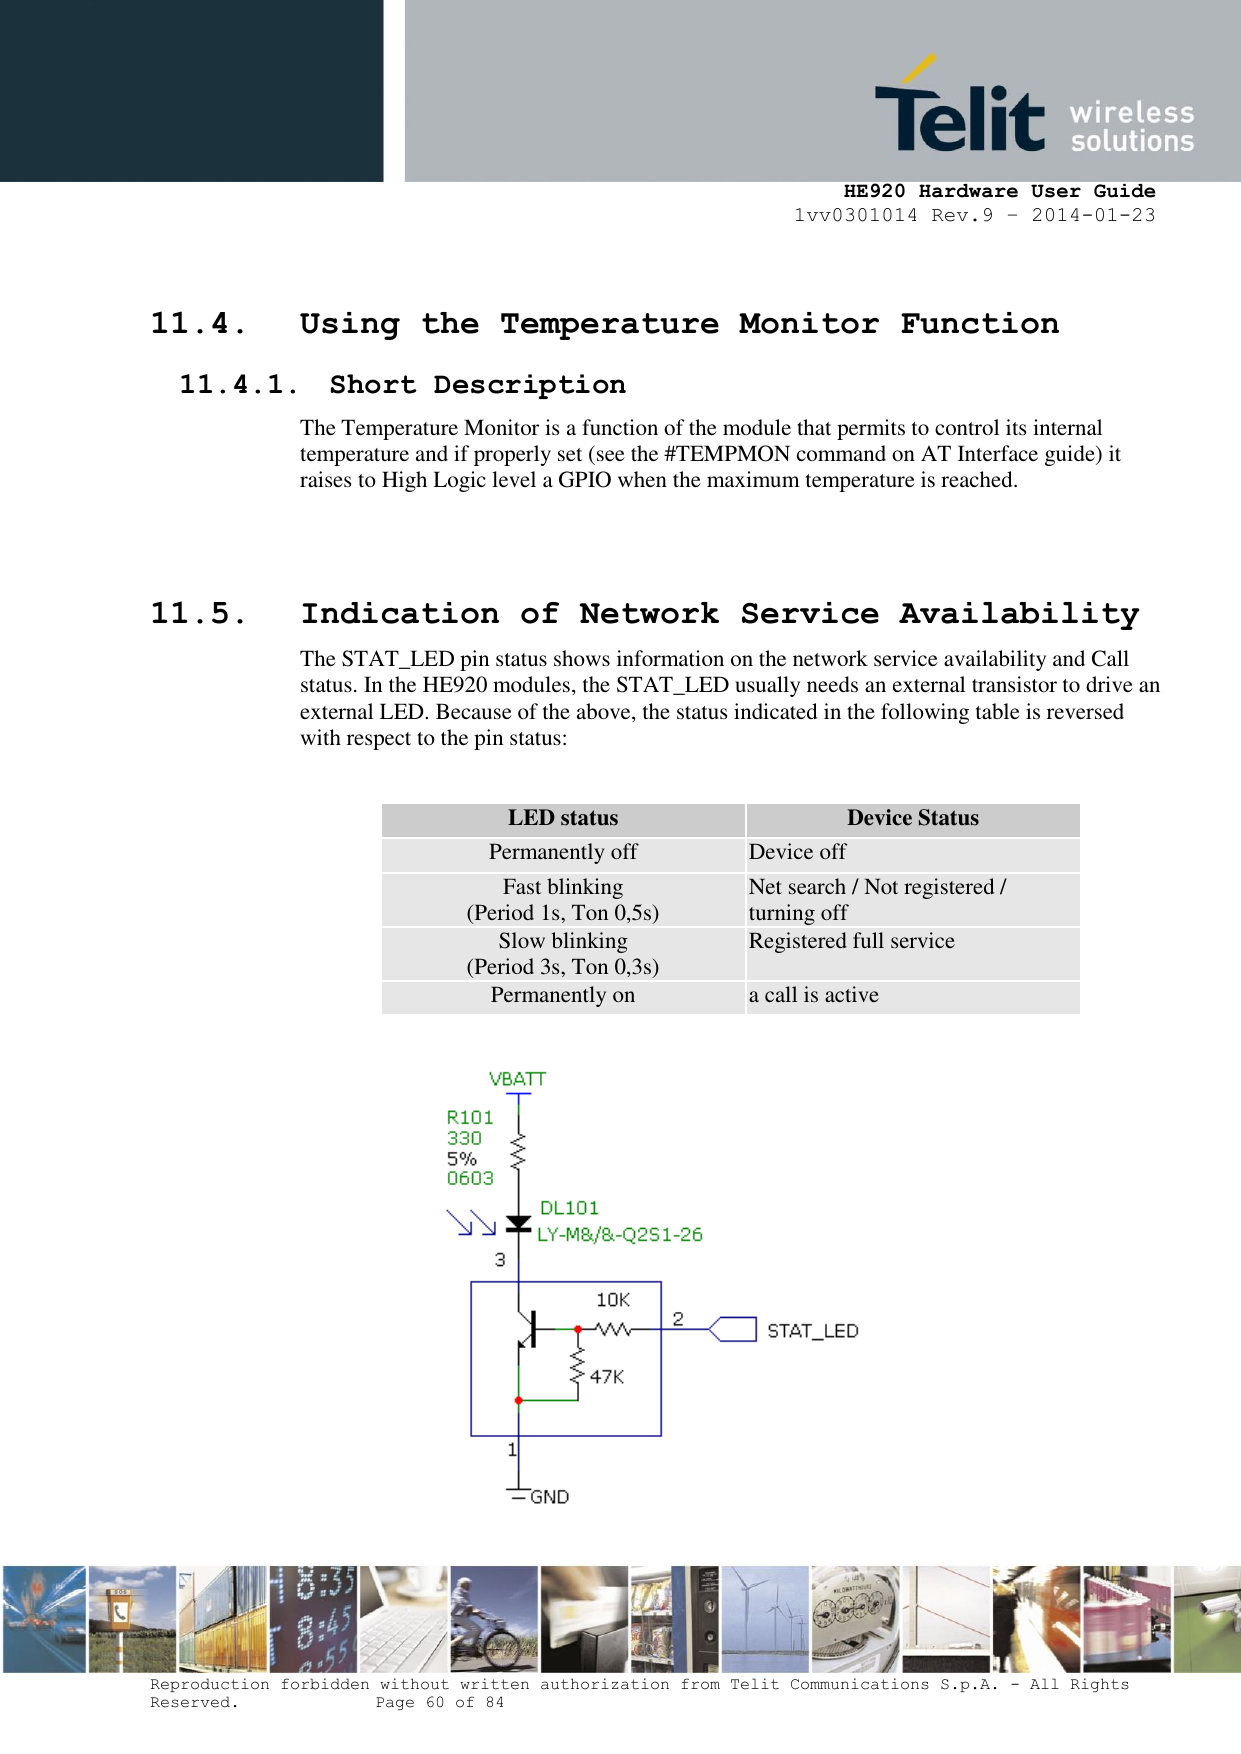     HE920 Hardware User Guide 1vv0301014 Rev.9 – 2014-01-23 Reproduction forbidden without written authorization from Telit Communications S.p.A. - All Rights Reserved.    Page 60 of 84   11.4. Using the Temperature Monitor Function 11.4.1. Short Description The Temperature Monitor is a function of the module that permits to control its internal temperature and if properly set (see the #TEMPMON command on AT Interface guide) it raises to High Logic level a GPIO when the maximum temperature is reached.   11.5. Indication of Network Service Availability The STAT_LED pin status shows information on the network service availability and Call status. In the HE920 modules, the STAT_LED usually needs an external transistor to drive an external LED. Because of the above, the status indicated in the following table is reversed with respect to the pin status:  LED status Device Status Permanently off Device off Fast blinking (Period 1s, Ton 0,5s) Net search / Not registered / turning off Slow blinking (Period 3s, Ton 0,3s) Registered full service Permanently on a call is active           